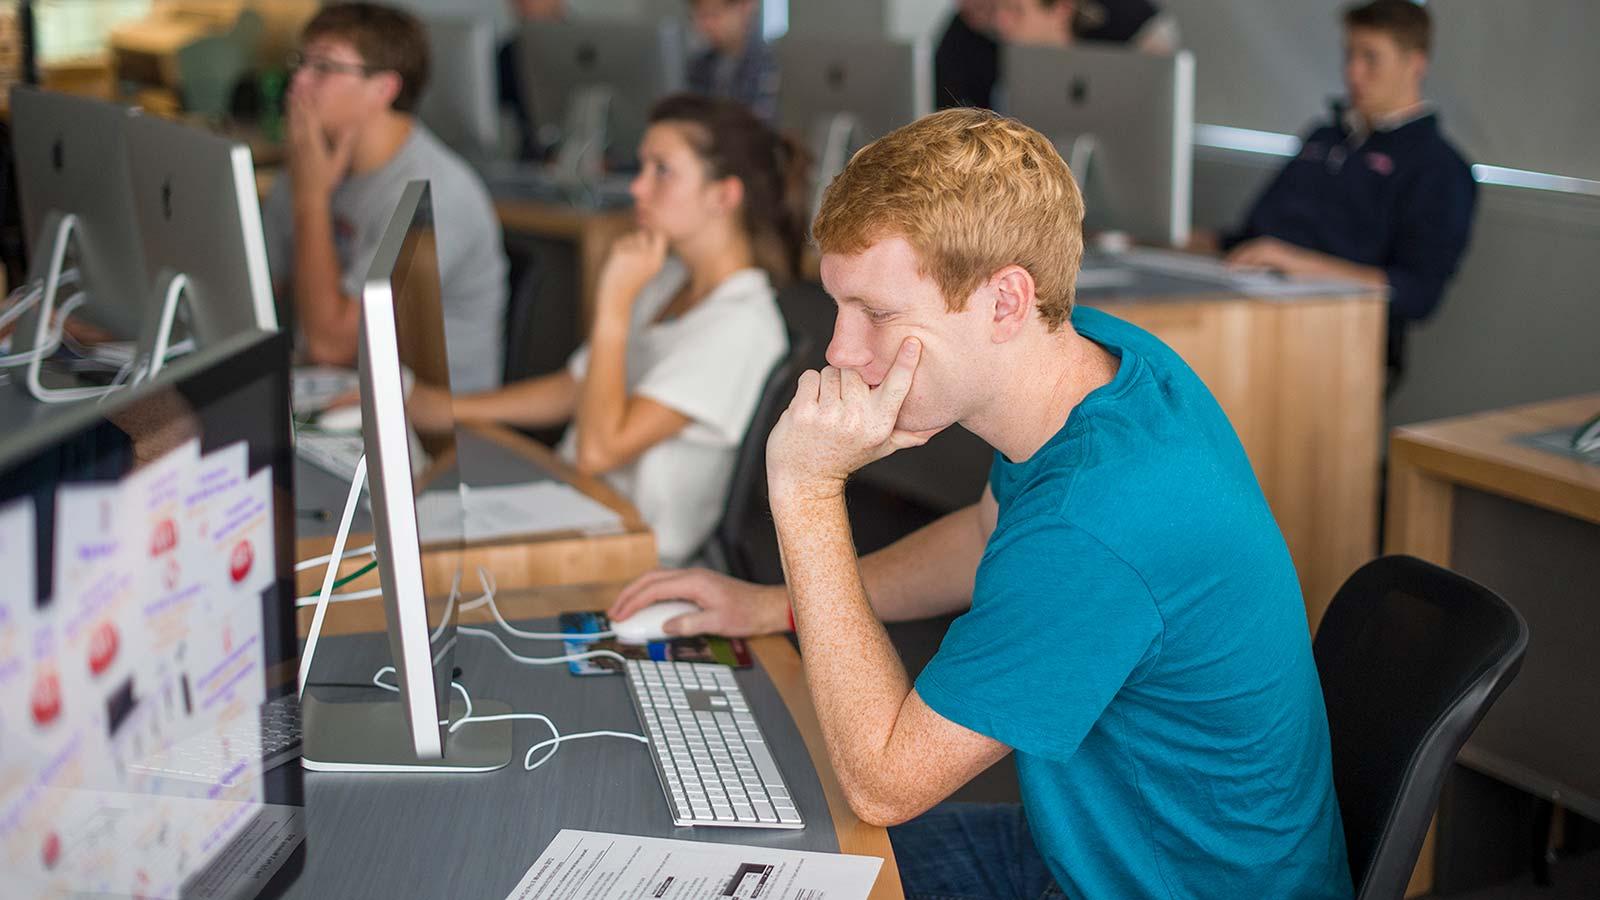 A student works at a Mac workstation in a computer lab